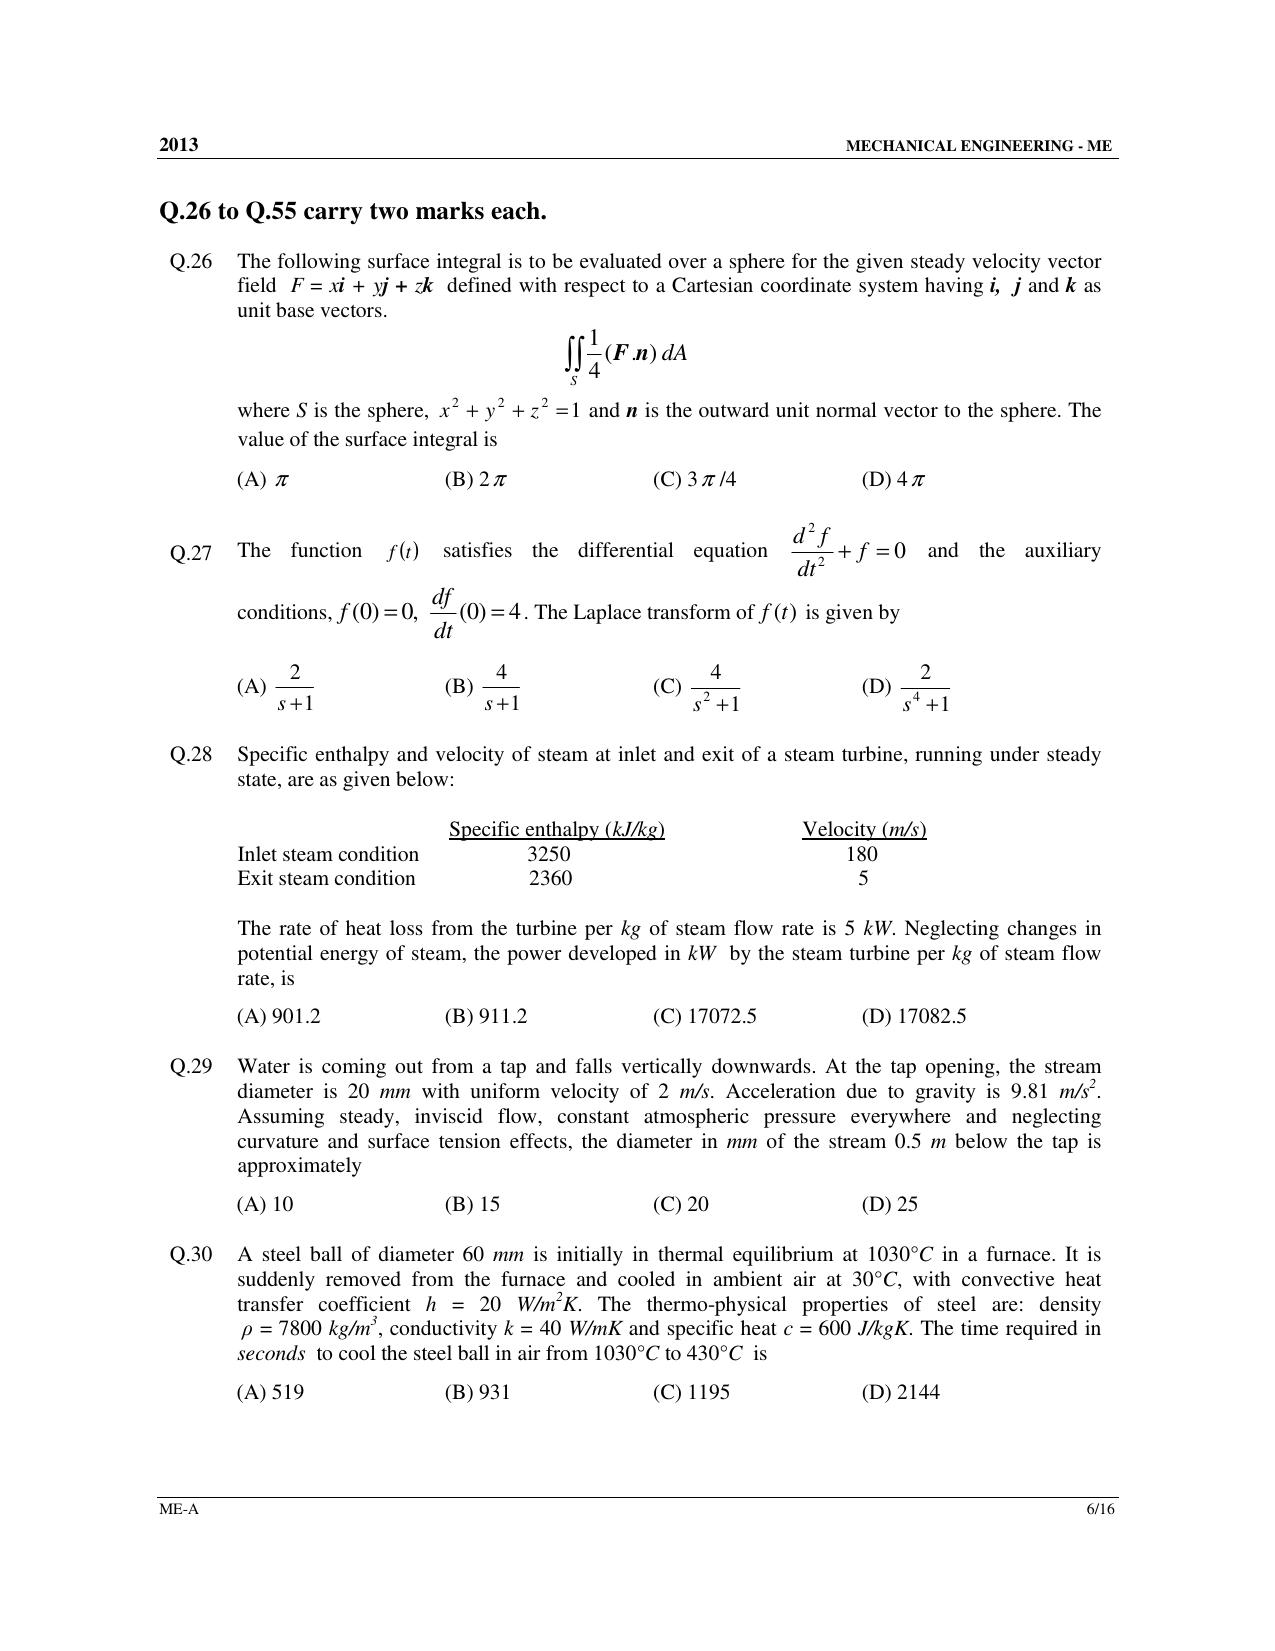 GATE 2013 Mechanical Engineering (ME) Question Paper with Answer Key - Page 7